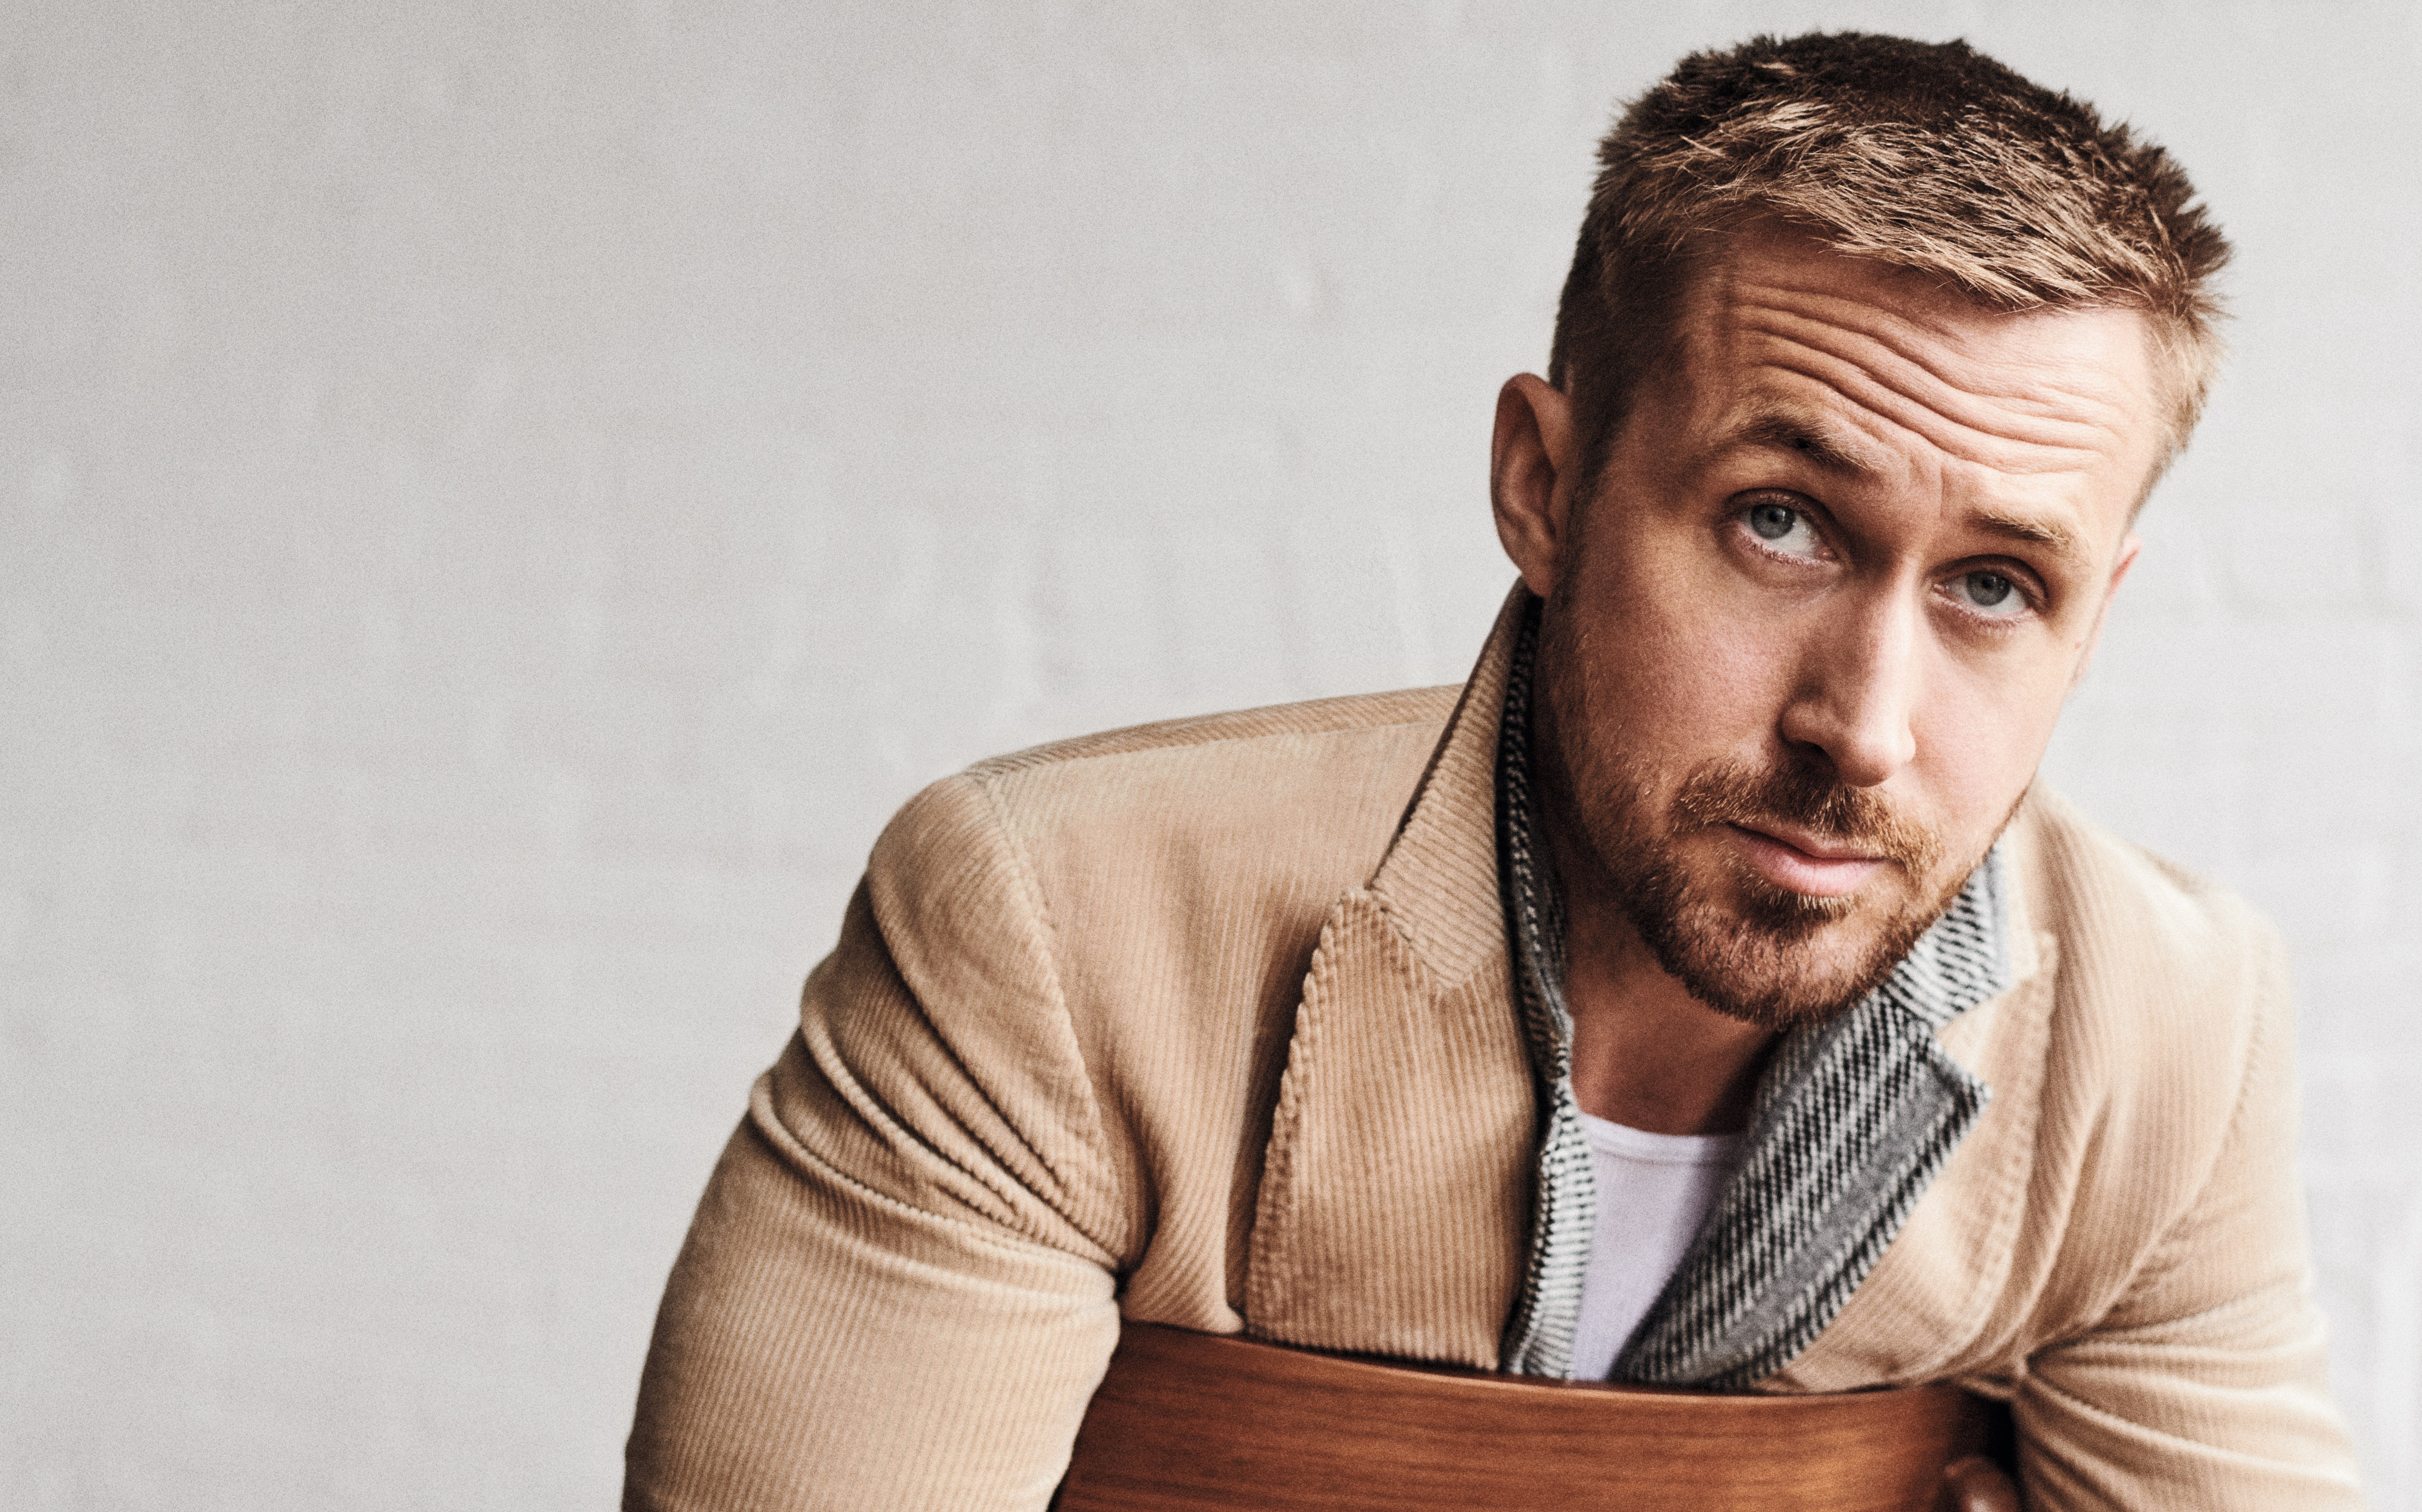 Ryan Gosling Gq 2018 8k Hd Celebrities 4k Wallpapers Images Backgrounds Photos And Pictures